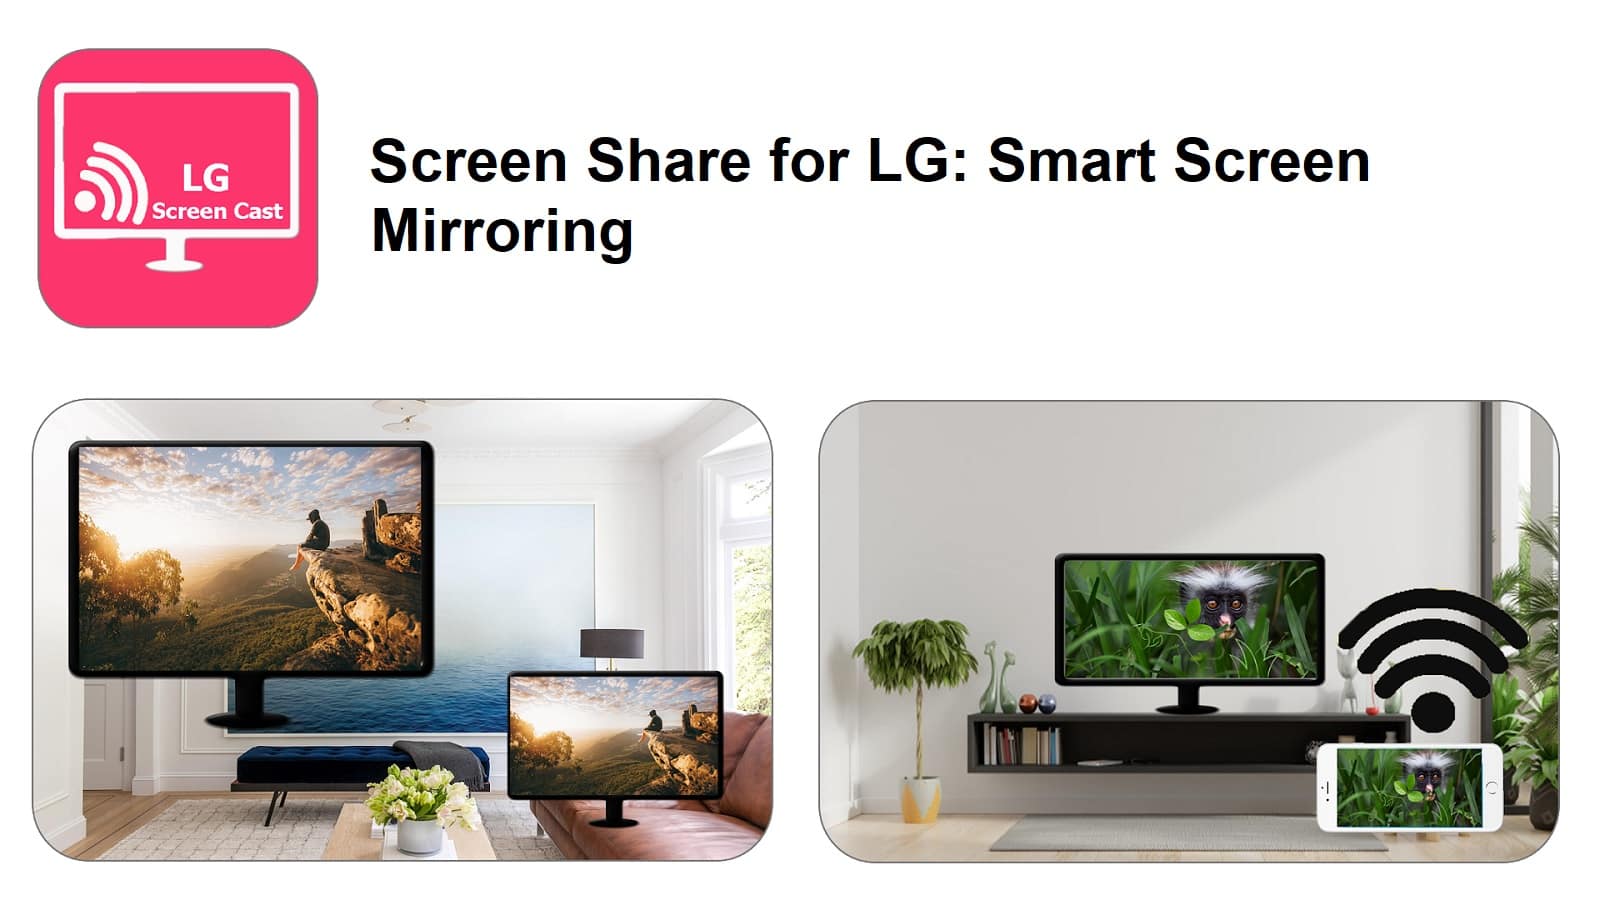 How To Cast To LG TV From Android, Free App